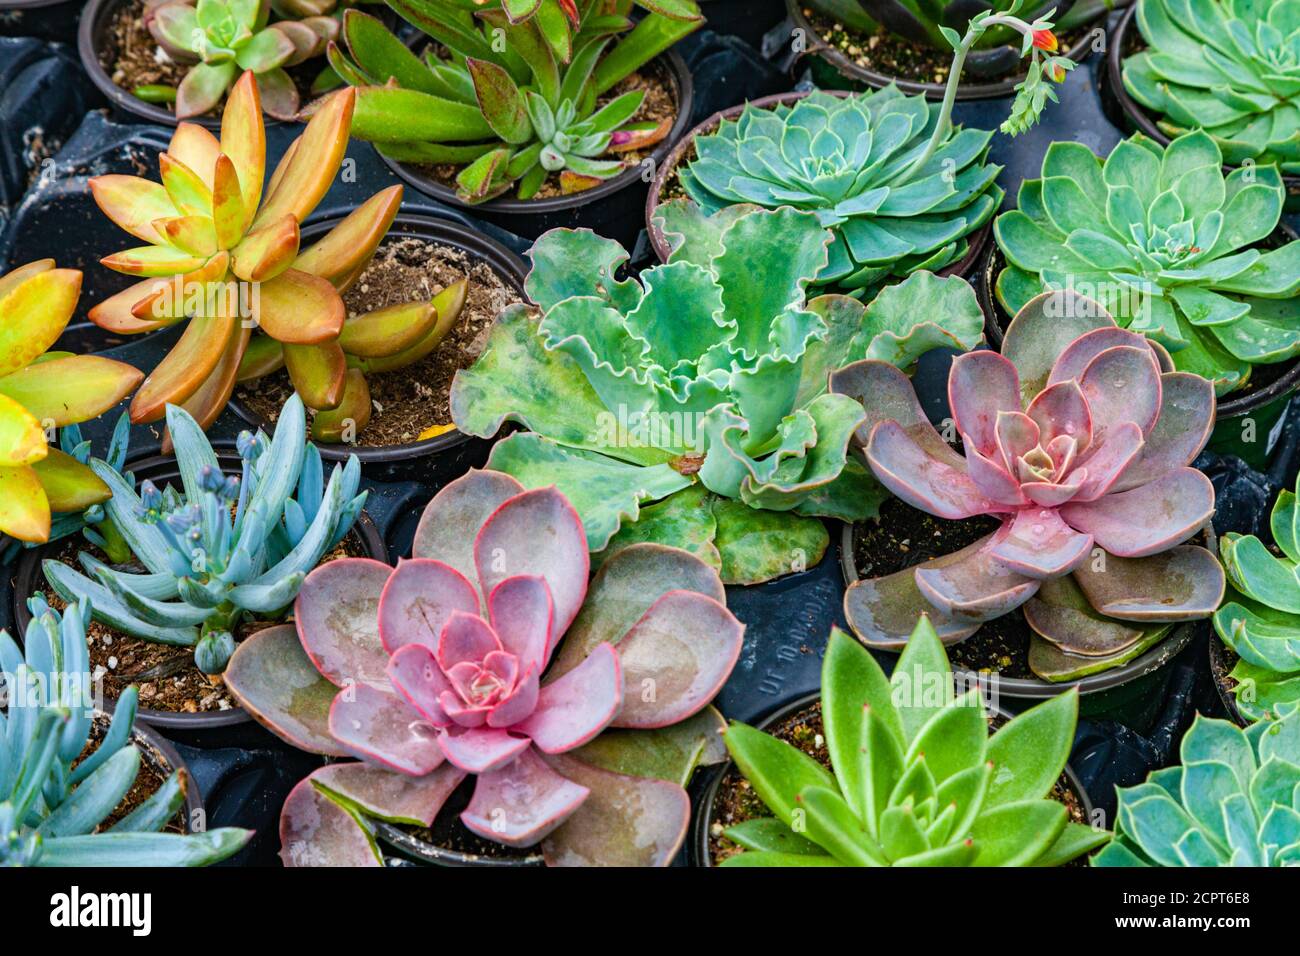 Variety of succulents for sale in a garden centre in Steveston Village British Columbia Canada Stock Photo